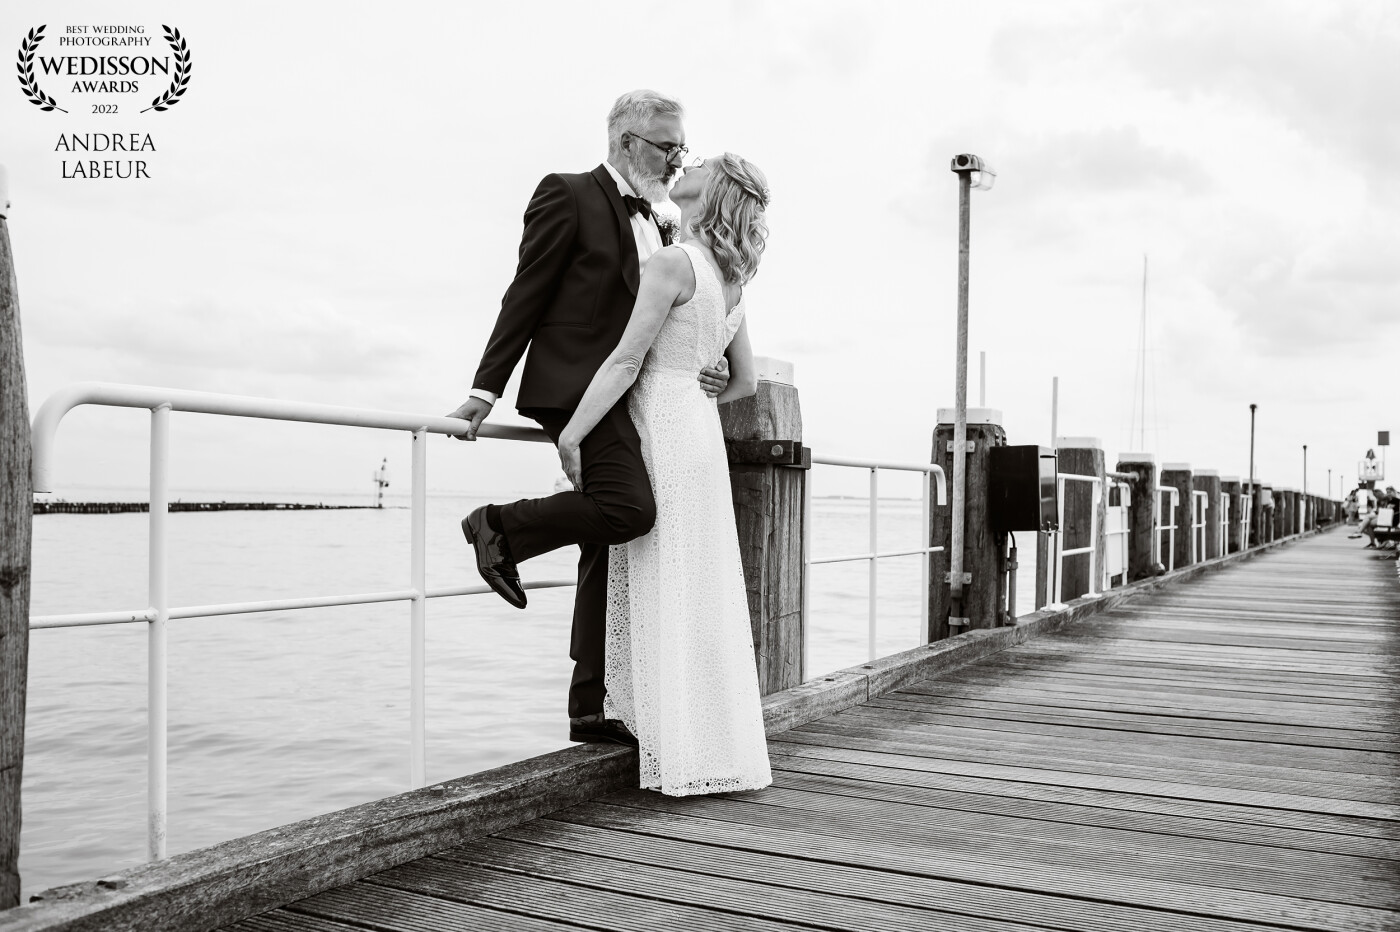 This Dutch bride showed her Austrian groom the Zeeland coast, and it looks like they had a great time during their bridal shoot!